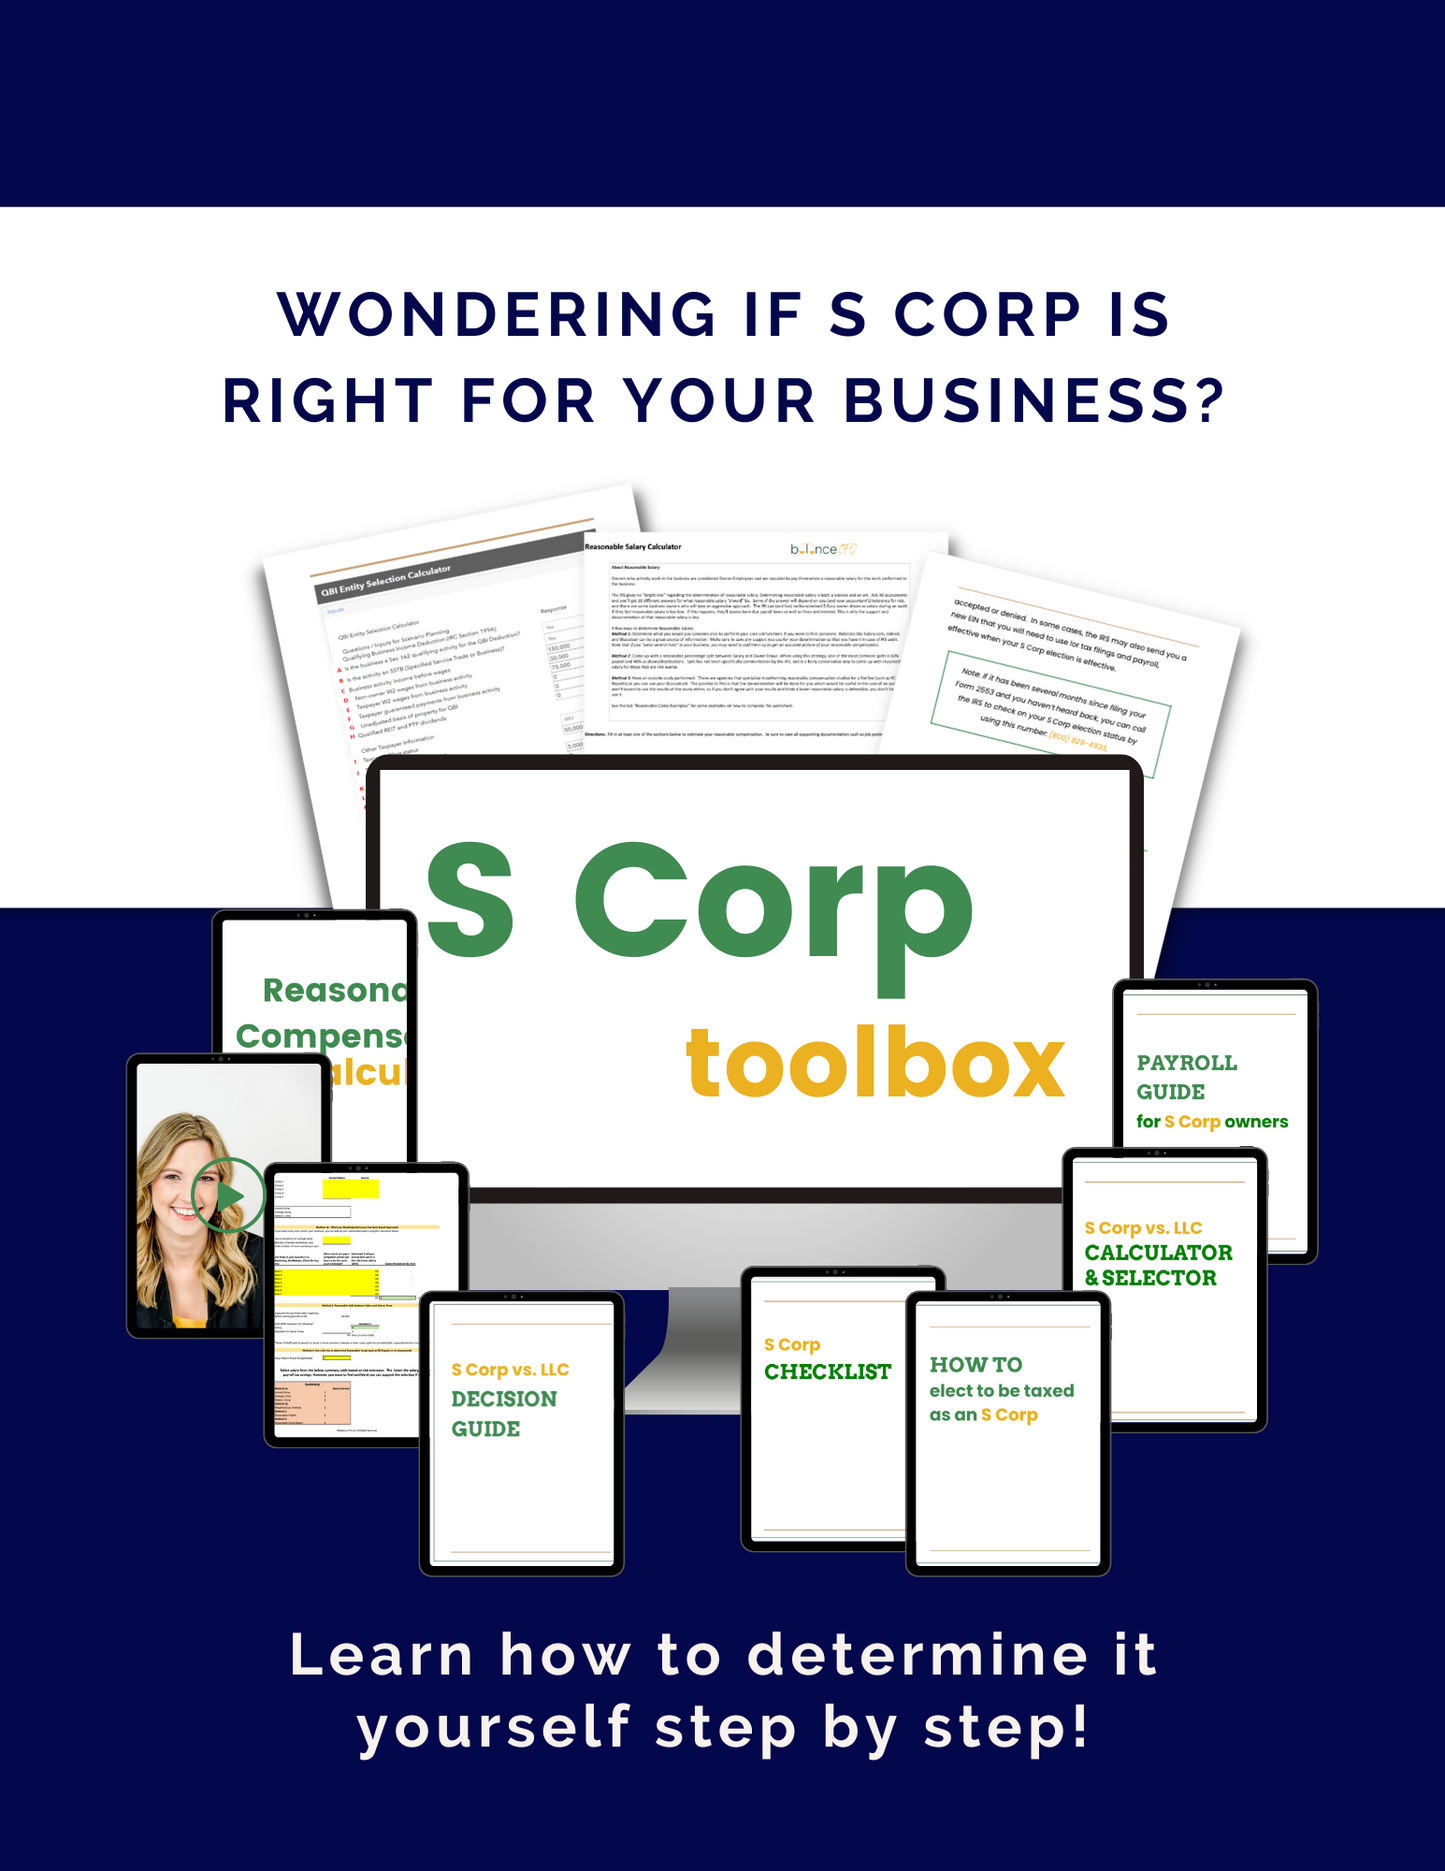 Wondering if S Corp is right for your business? Grab our S Corp toolbox. We've got an s-corp payroll guide and more.